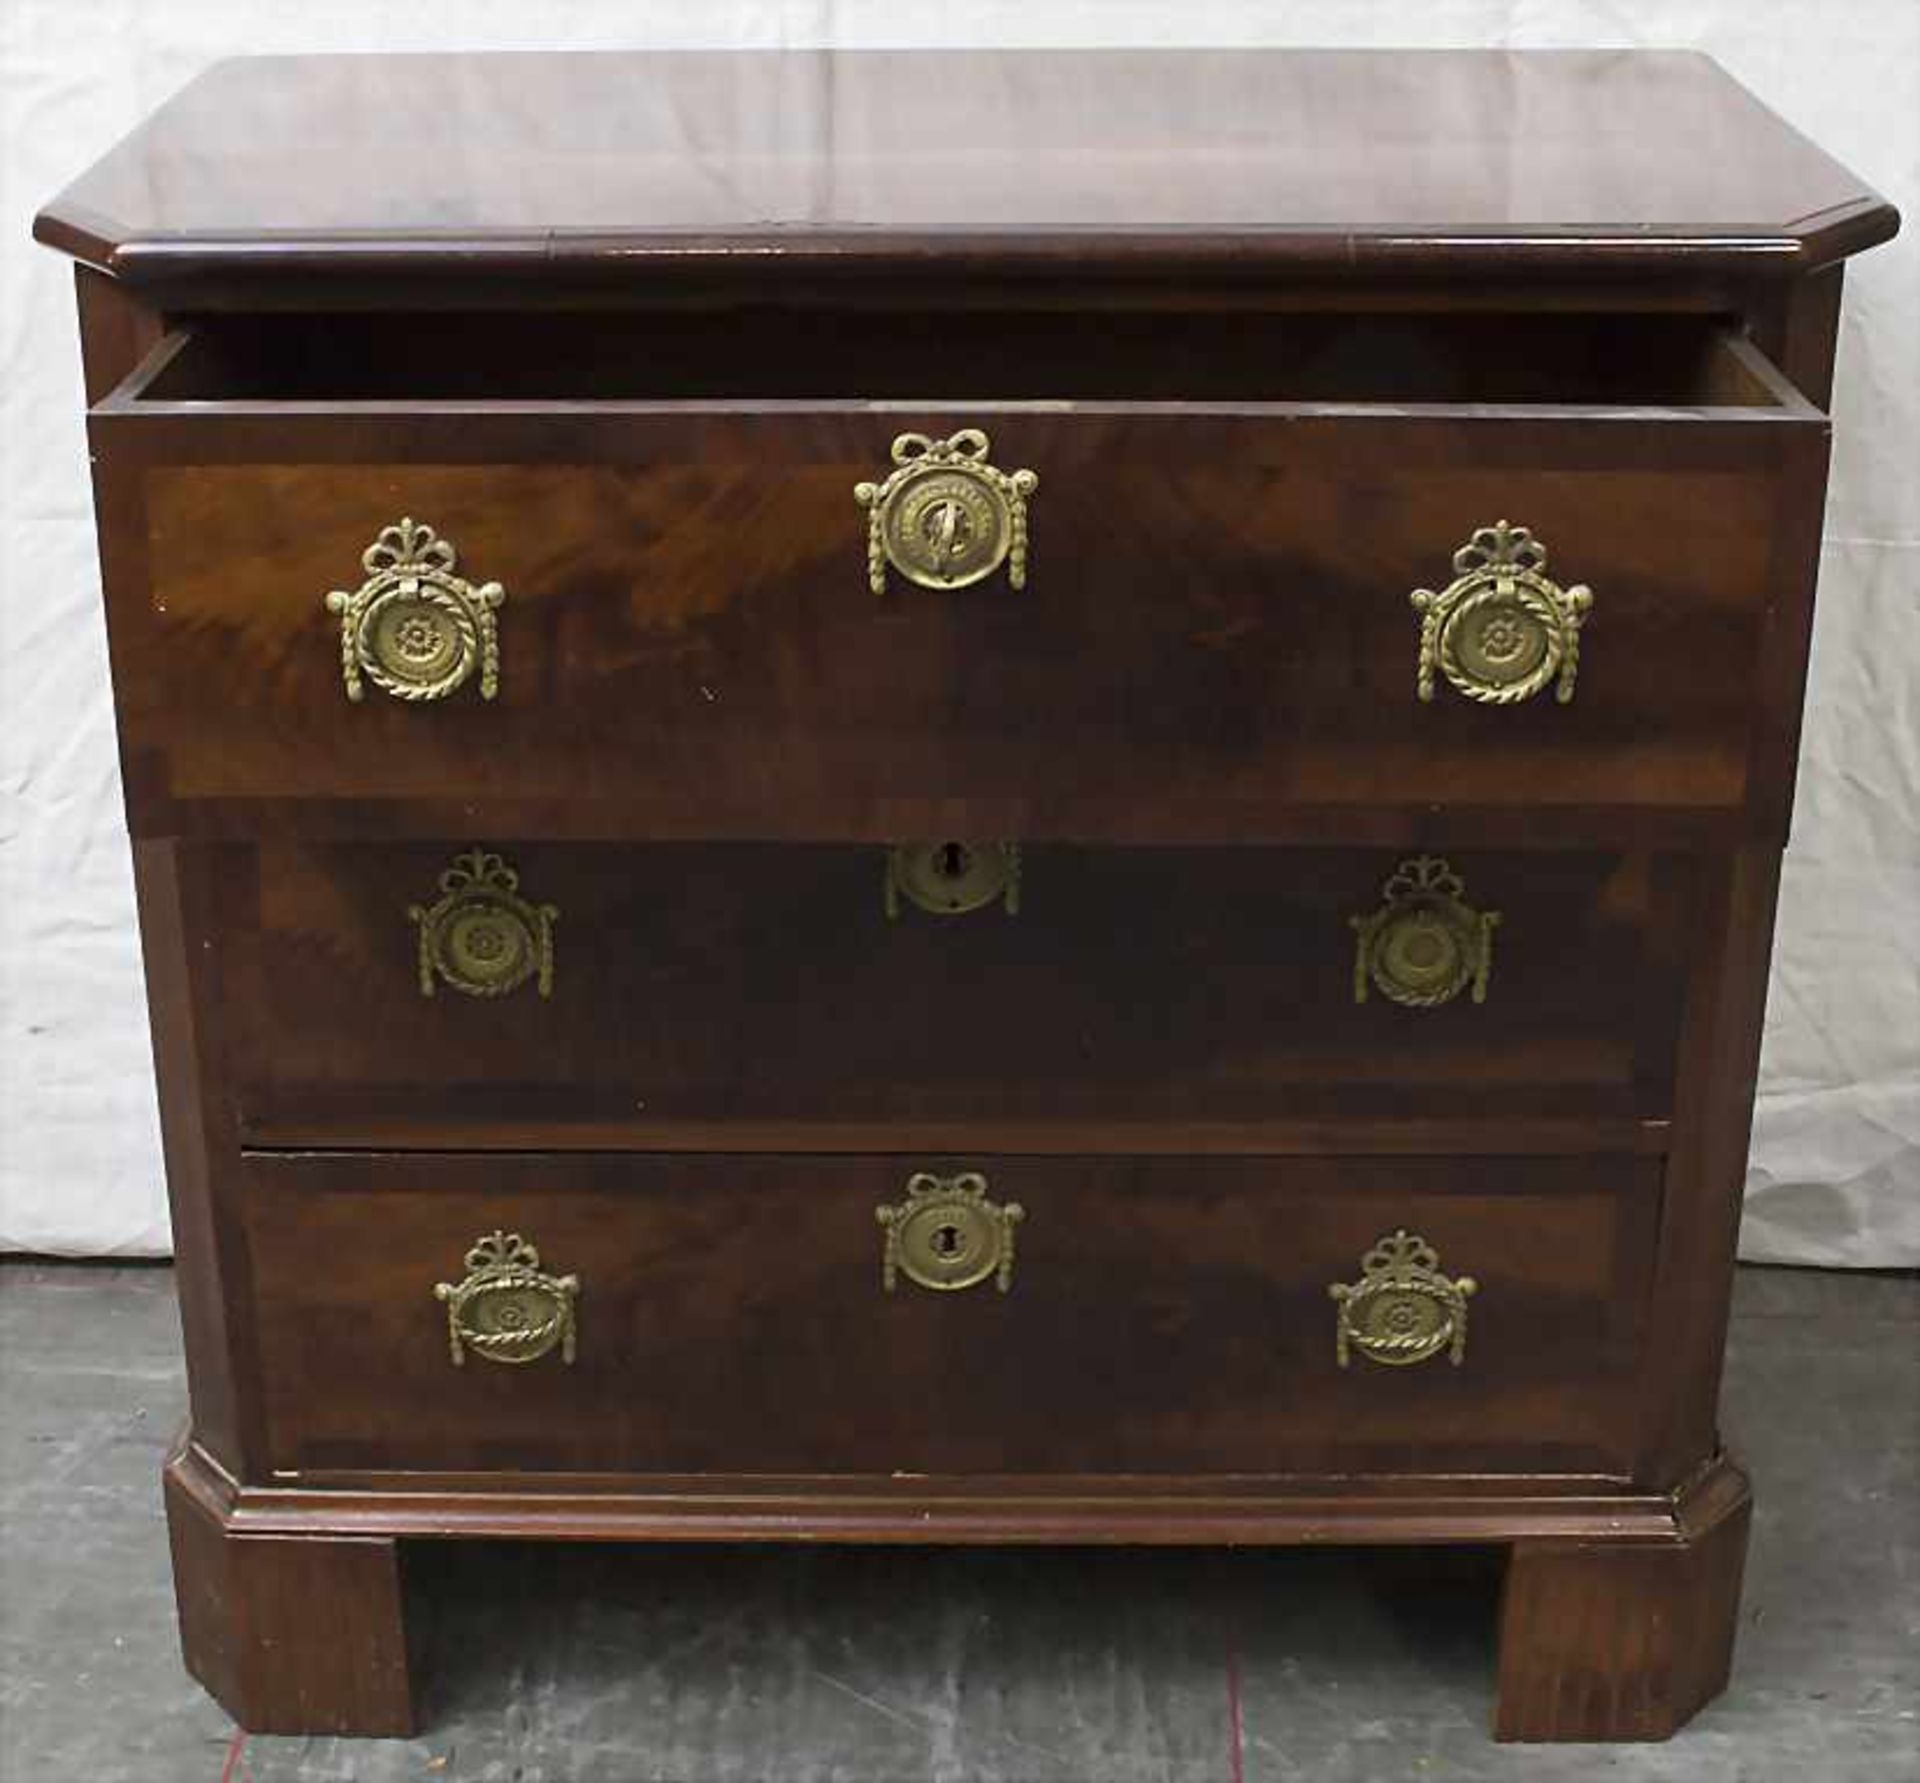 Kommode / A chest of drawers, 19. Jh. - Image 2 of 2